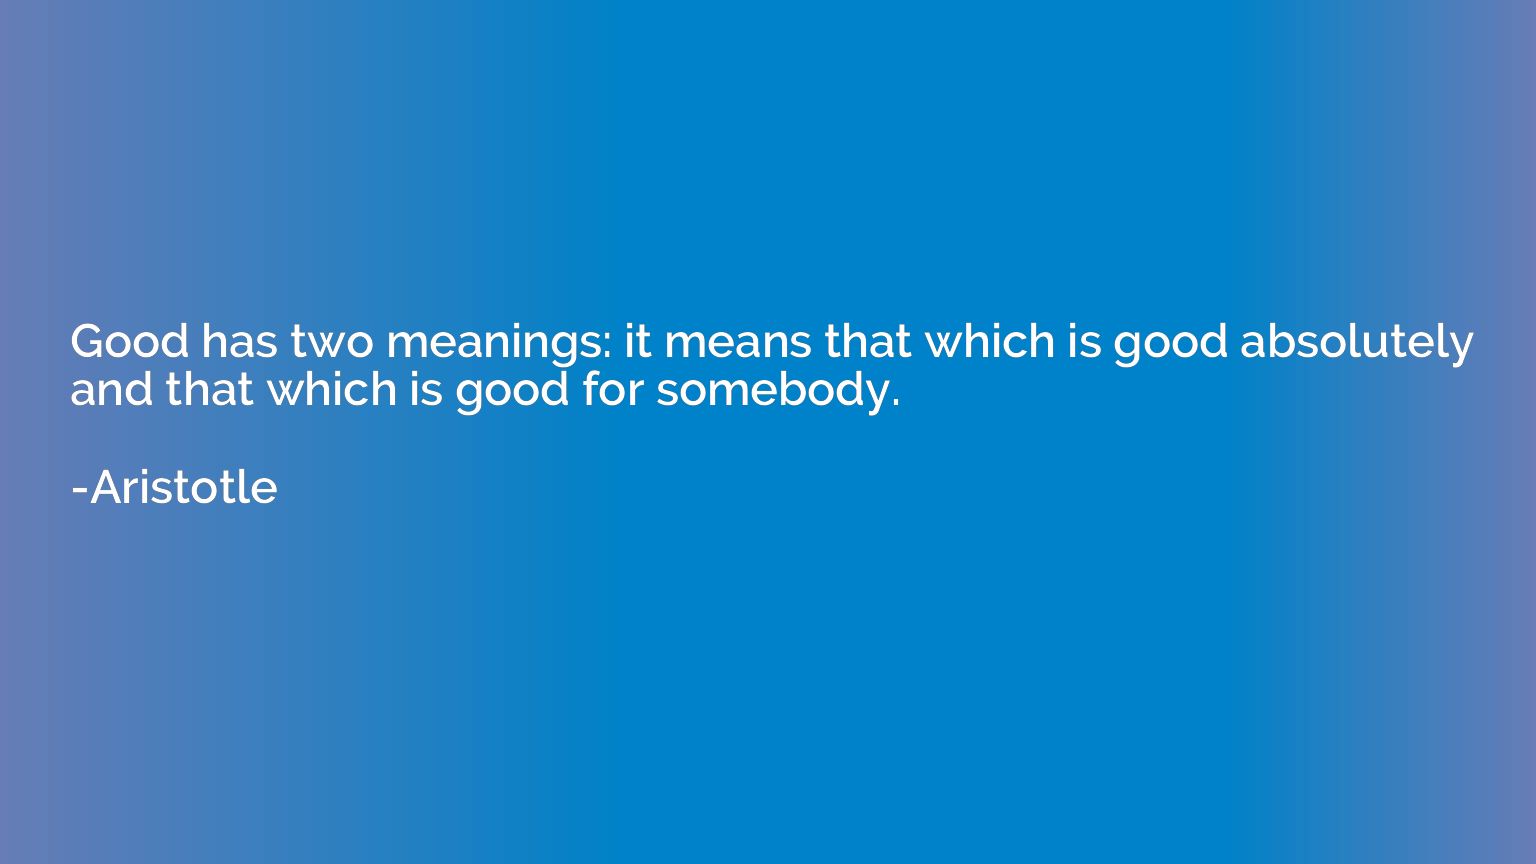 Good has two meanings: it means that which is good absolutel